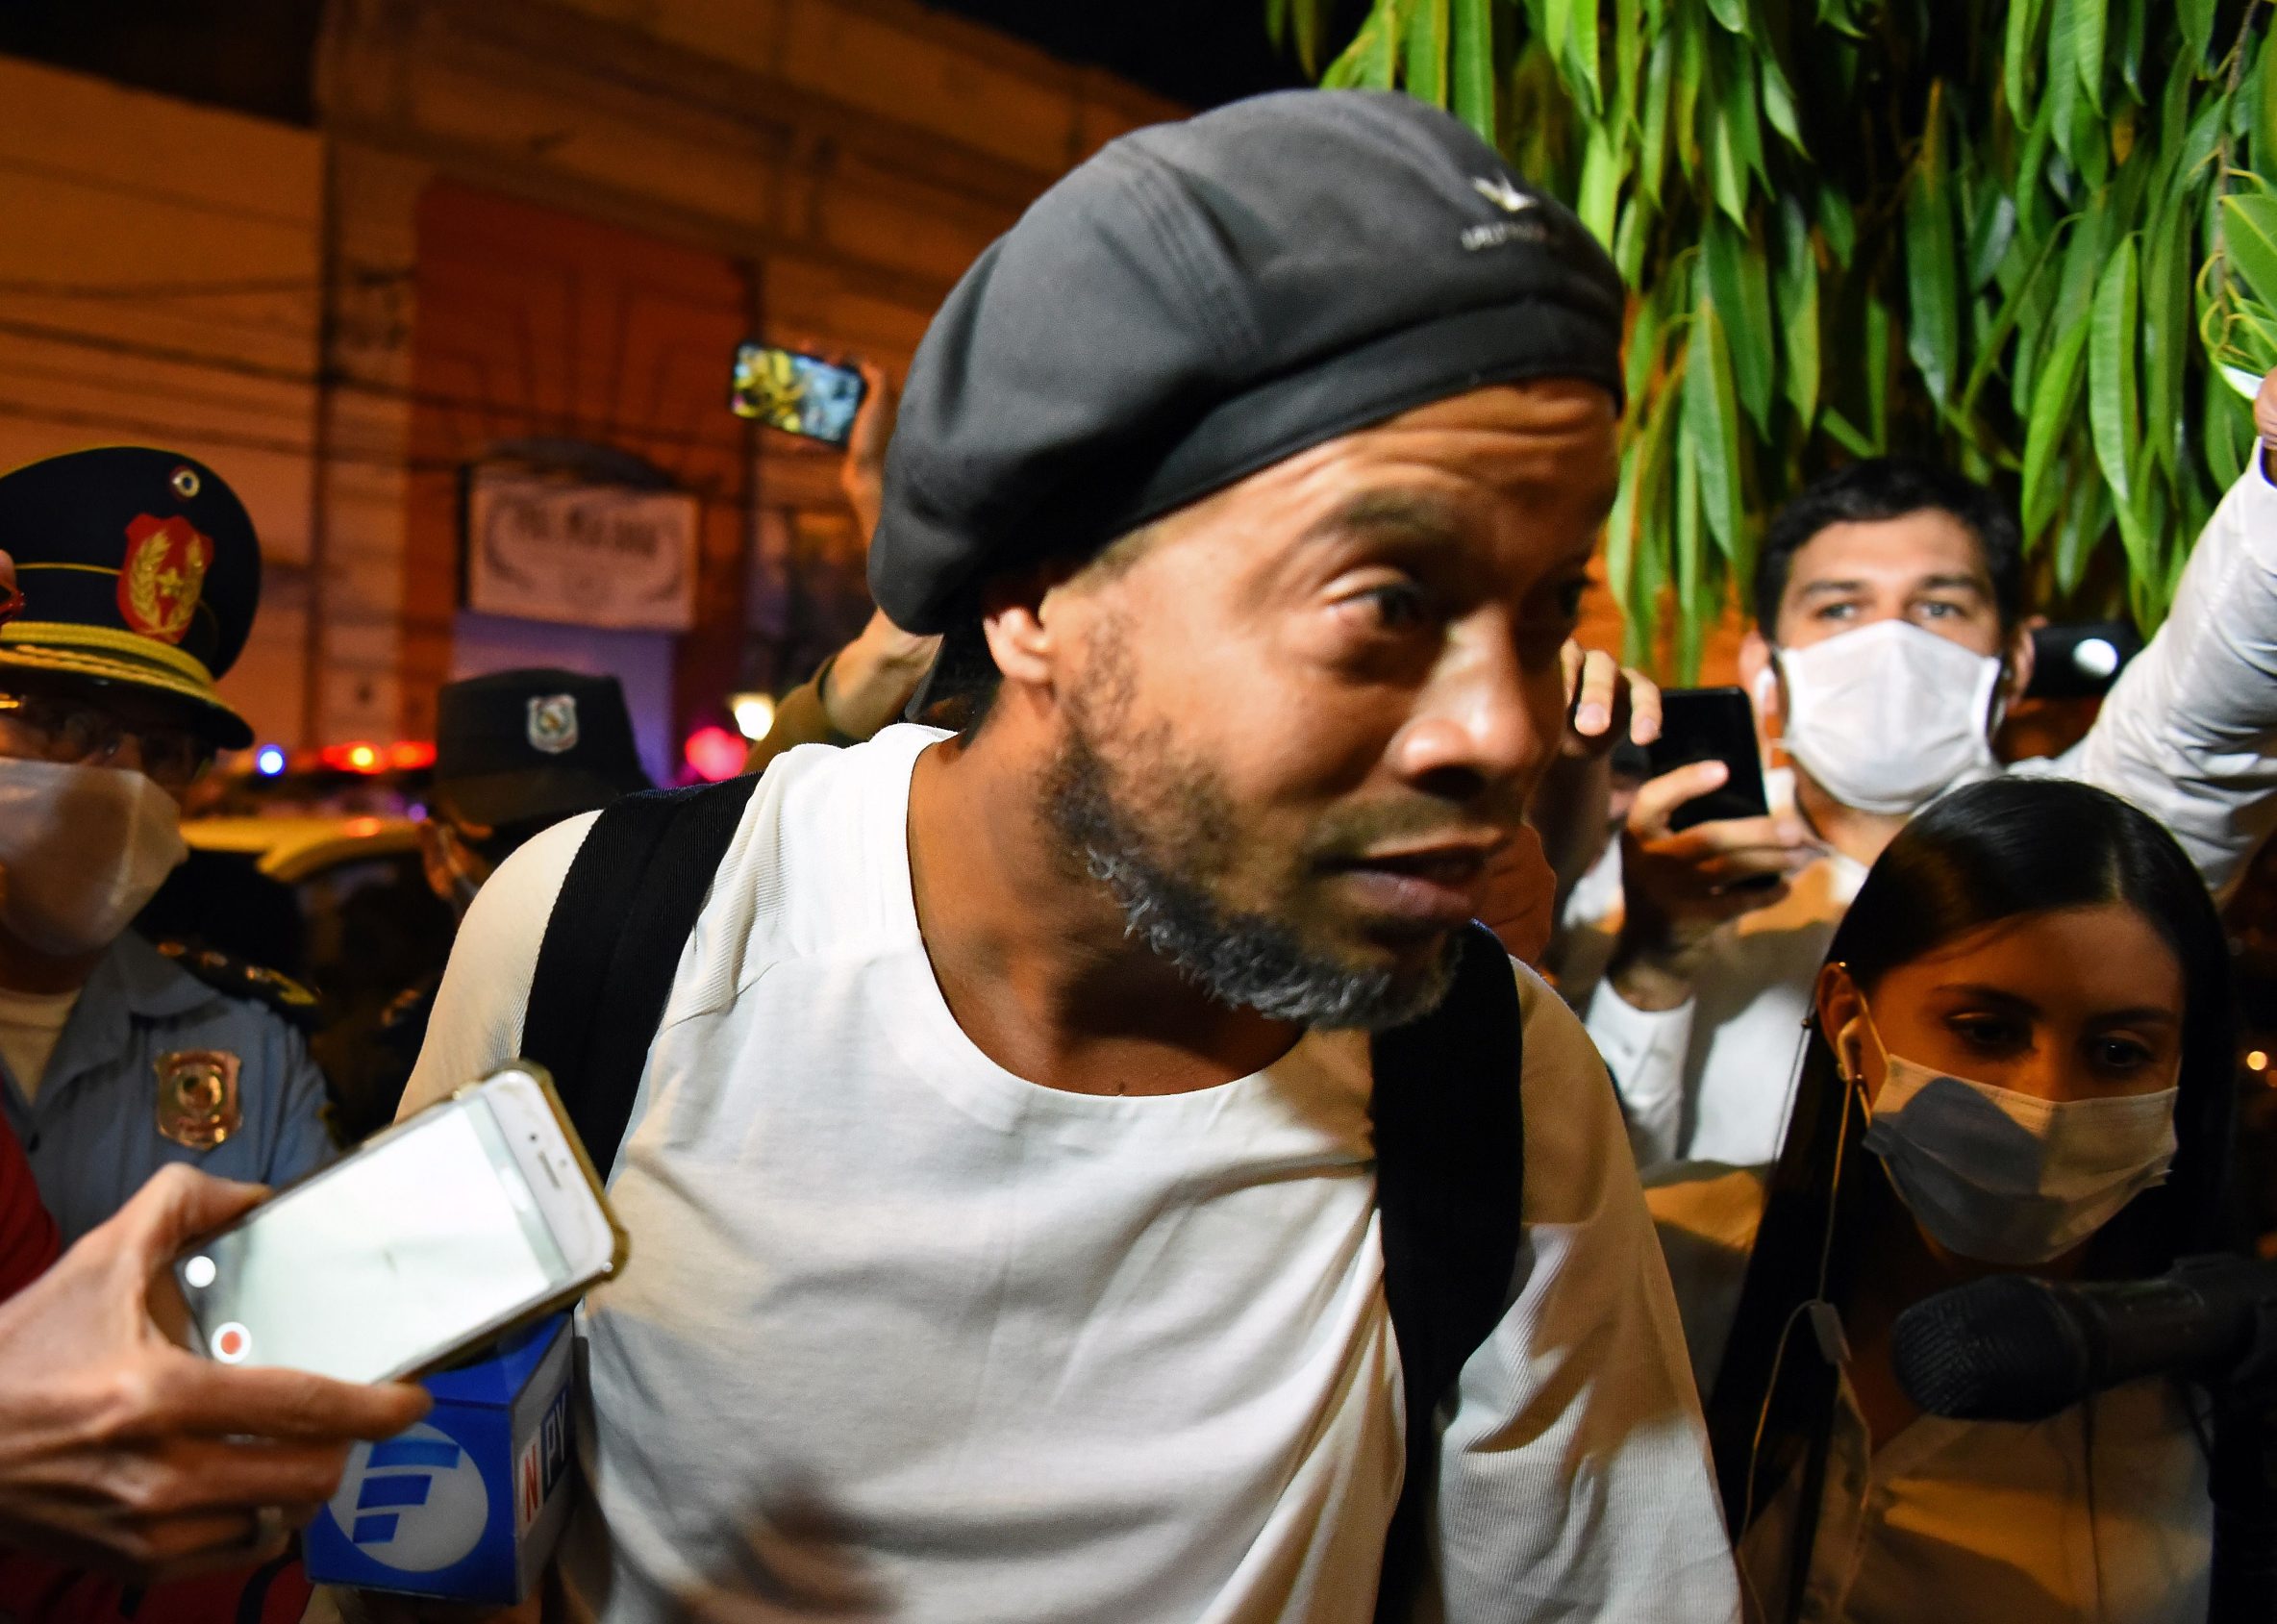 Brazilian retired football player Ronaldinho arrives at a hotel in Asuncion where he and his brother will serve house arrest after a judge ordered their release from jail on April 7, 2020. - A judge in Paraguay ordered the release of Ronaldinho and his brother Roberto Assis into house arrest after the siblings spent almost exactly a month in jail awaiting trial on charges of using false passports to enter Paraguay. Lawyers for the men posted bail of .6 million. (Photo by Norberto DUARTE / AFP)